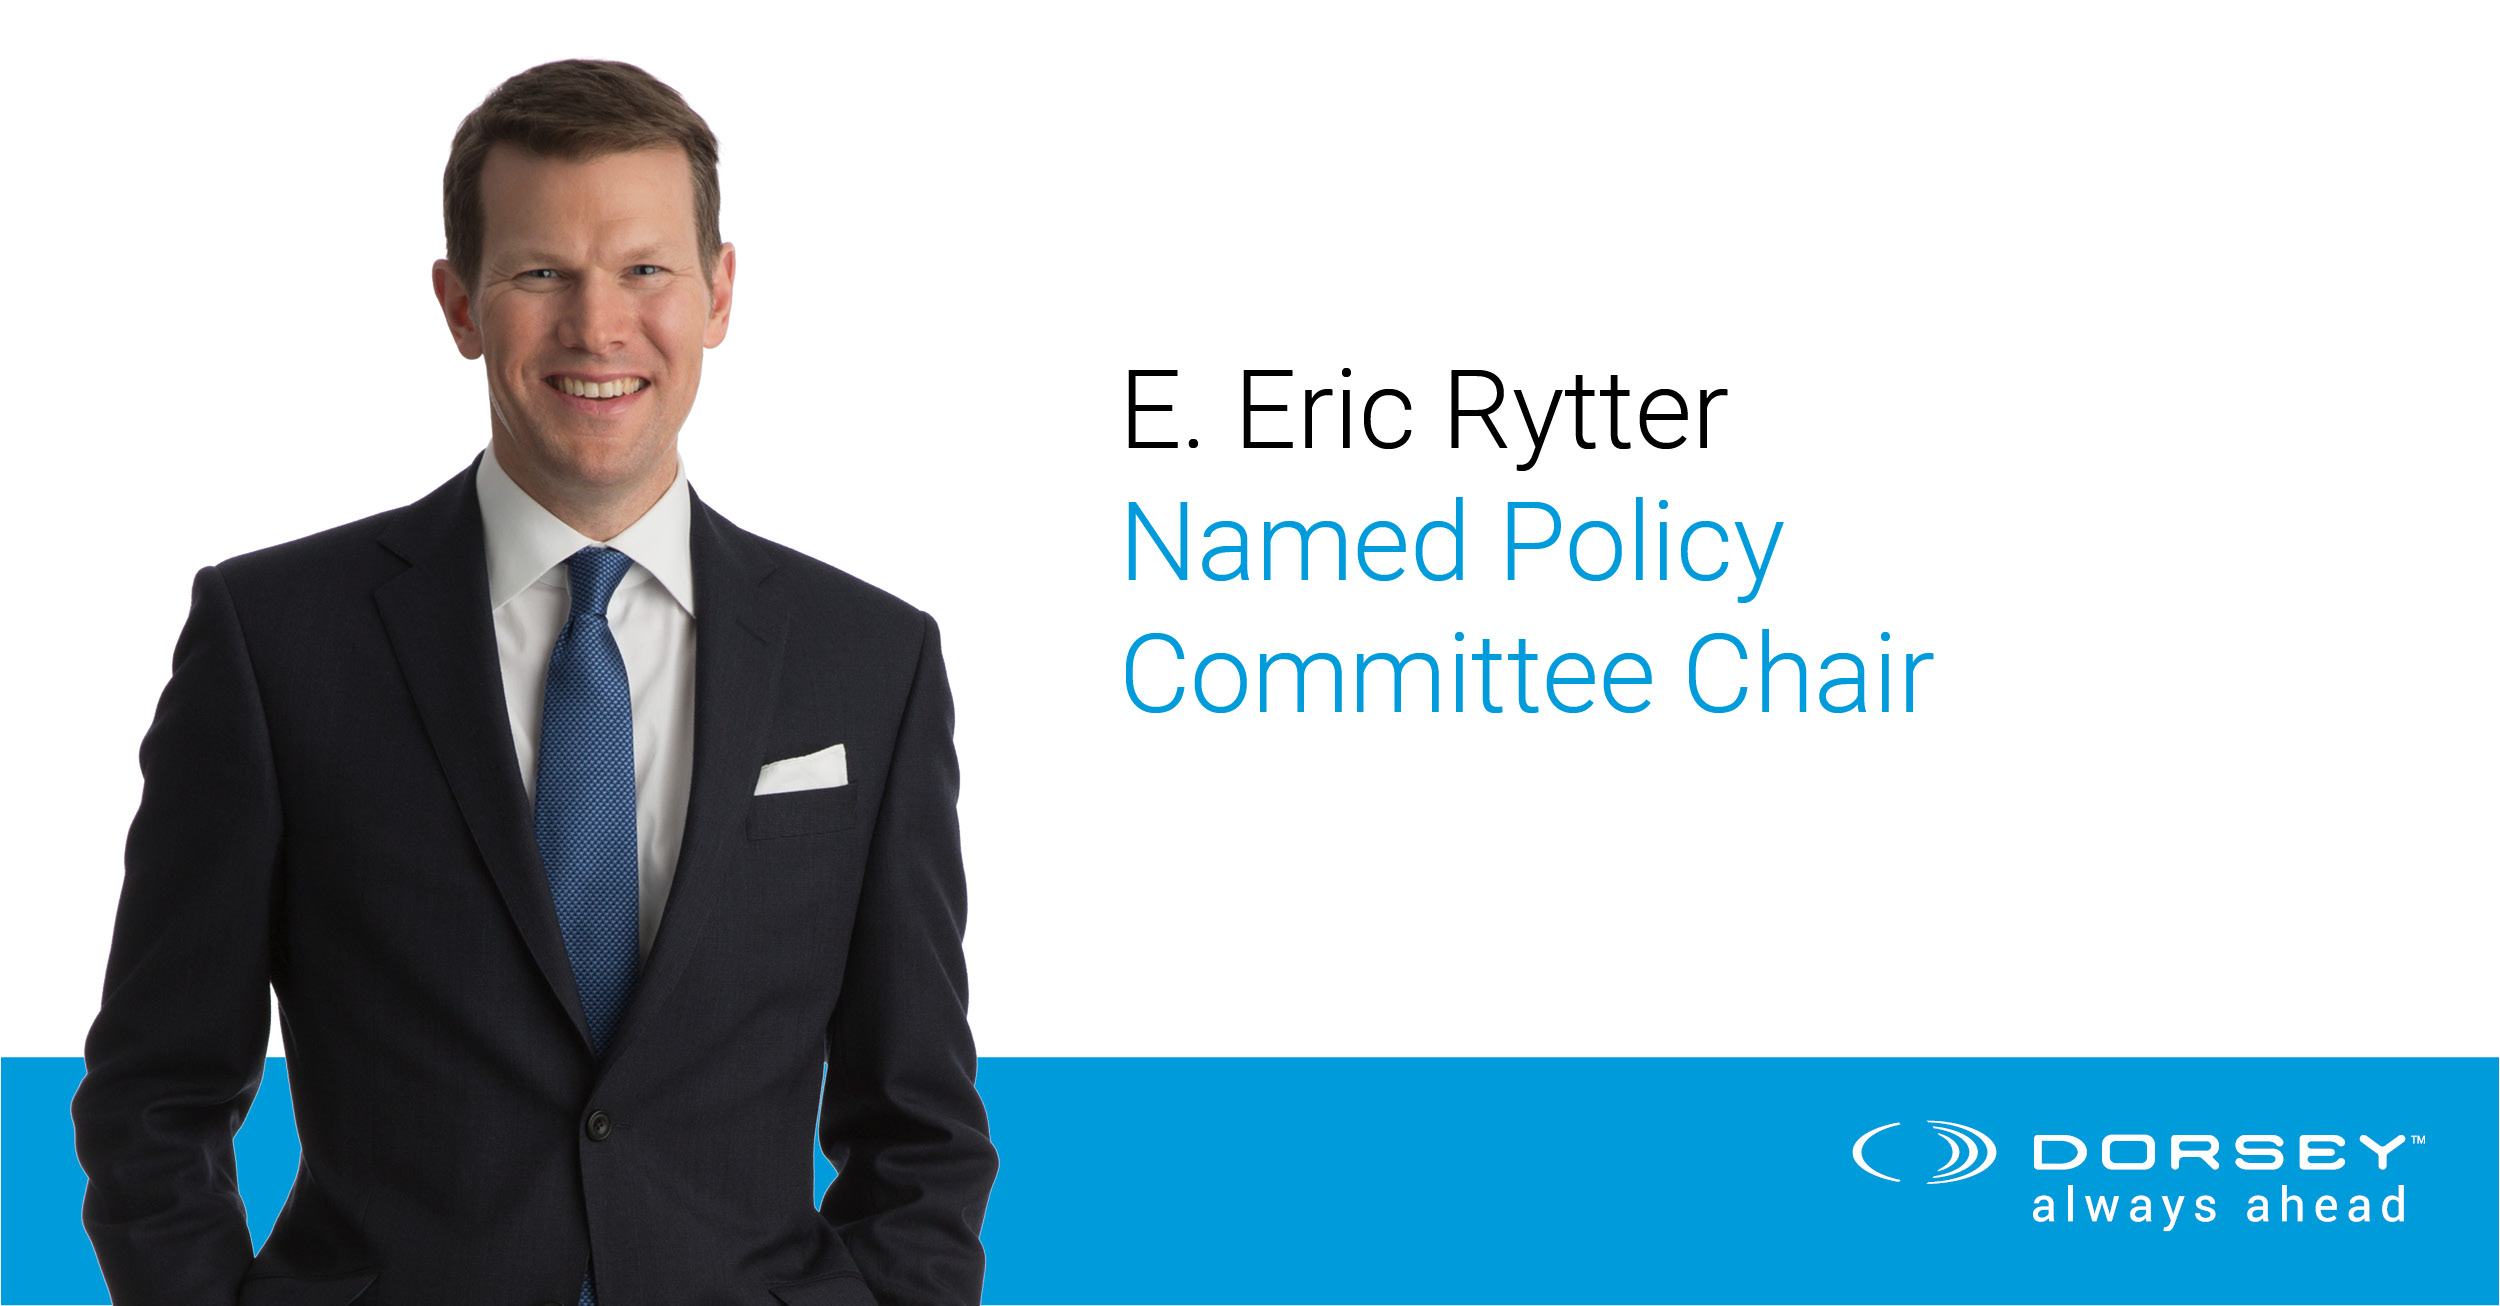 Eric Rytter Named Policy Committee Chair